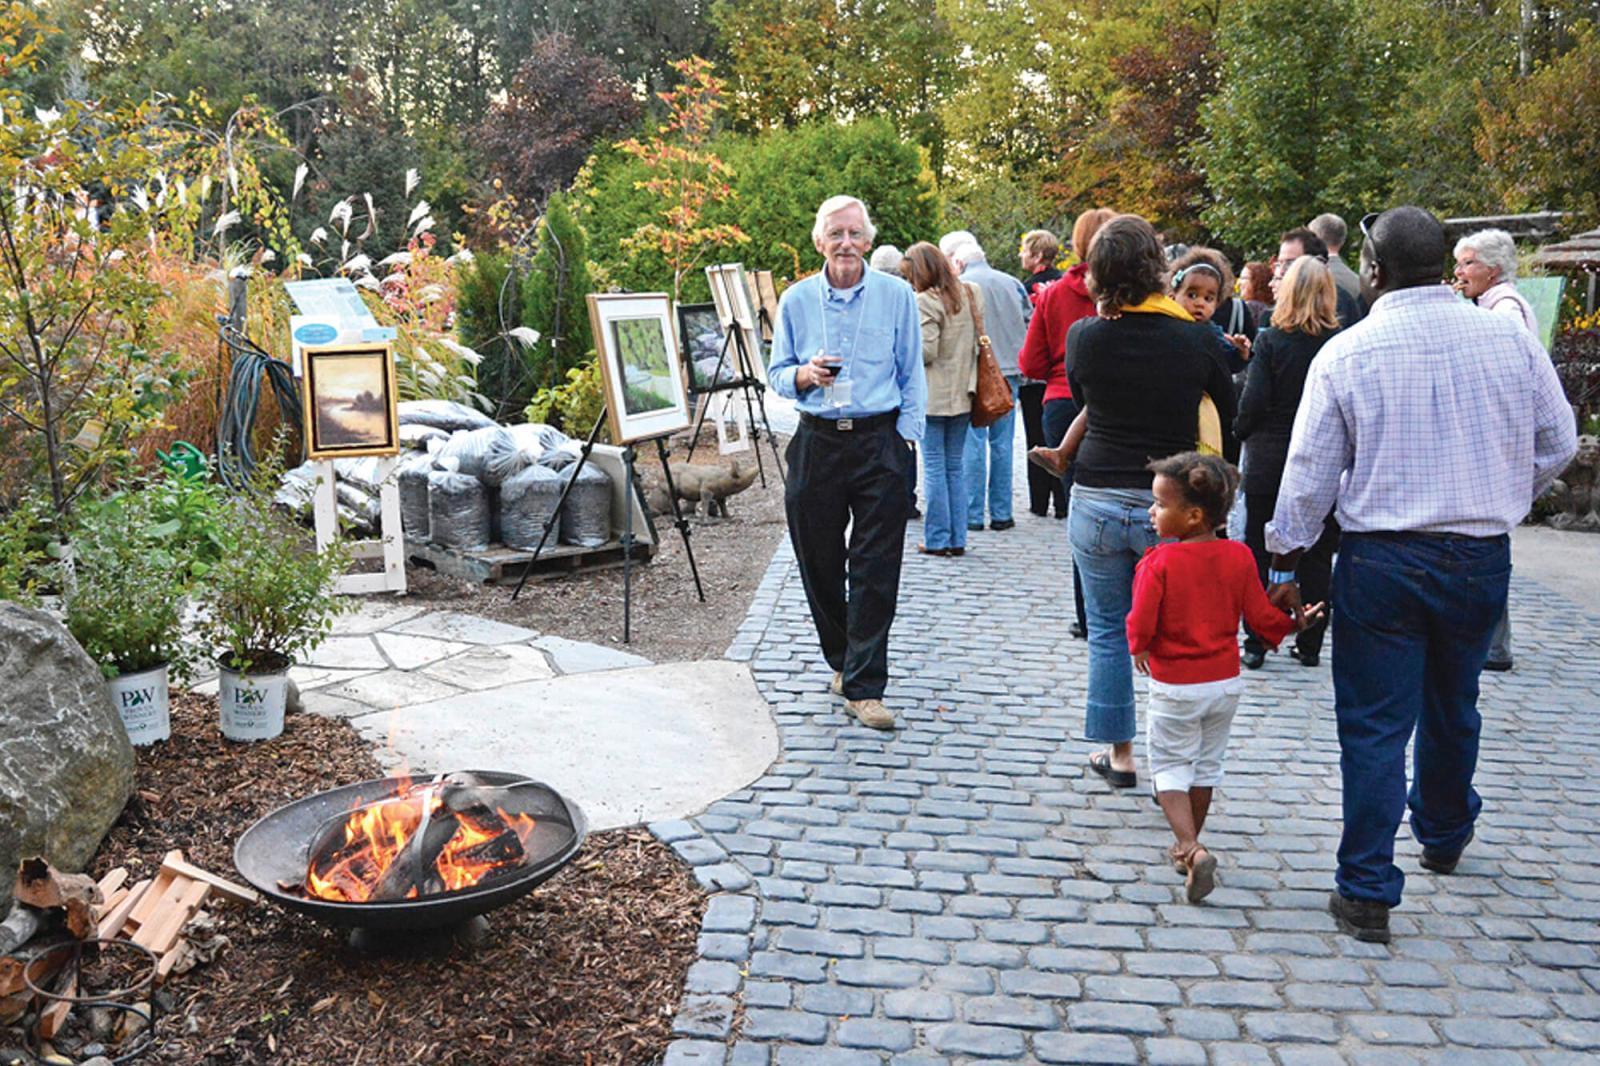 Pathways to Perennials opened its gardens for the 10th annual Art and Jazz Charity Garden Party, raising over $3,000 toward the Cancer Centre at Southlake Hospital in Newmarket.